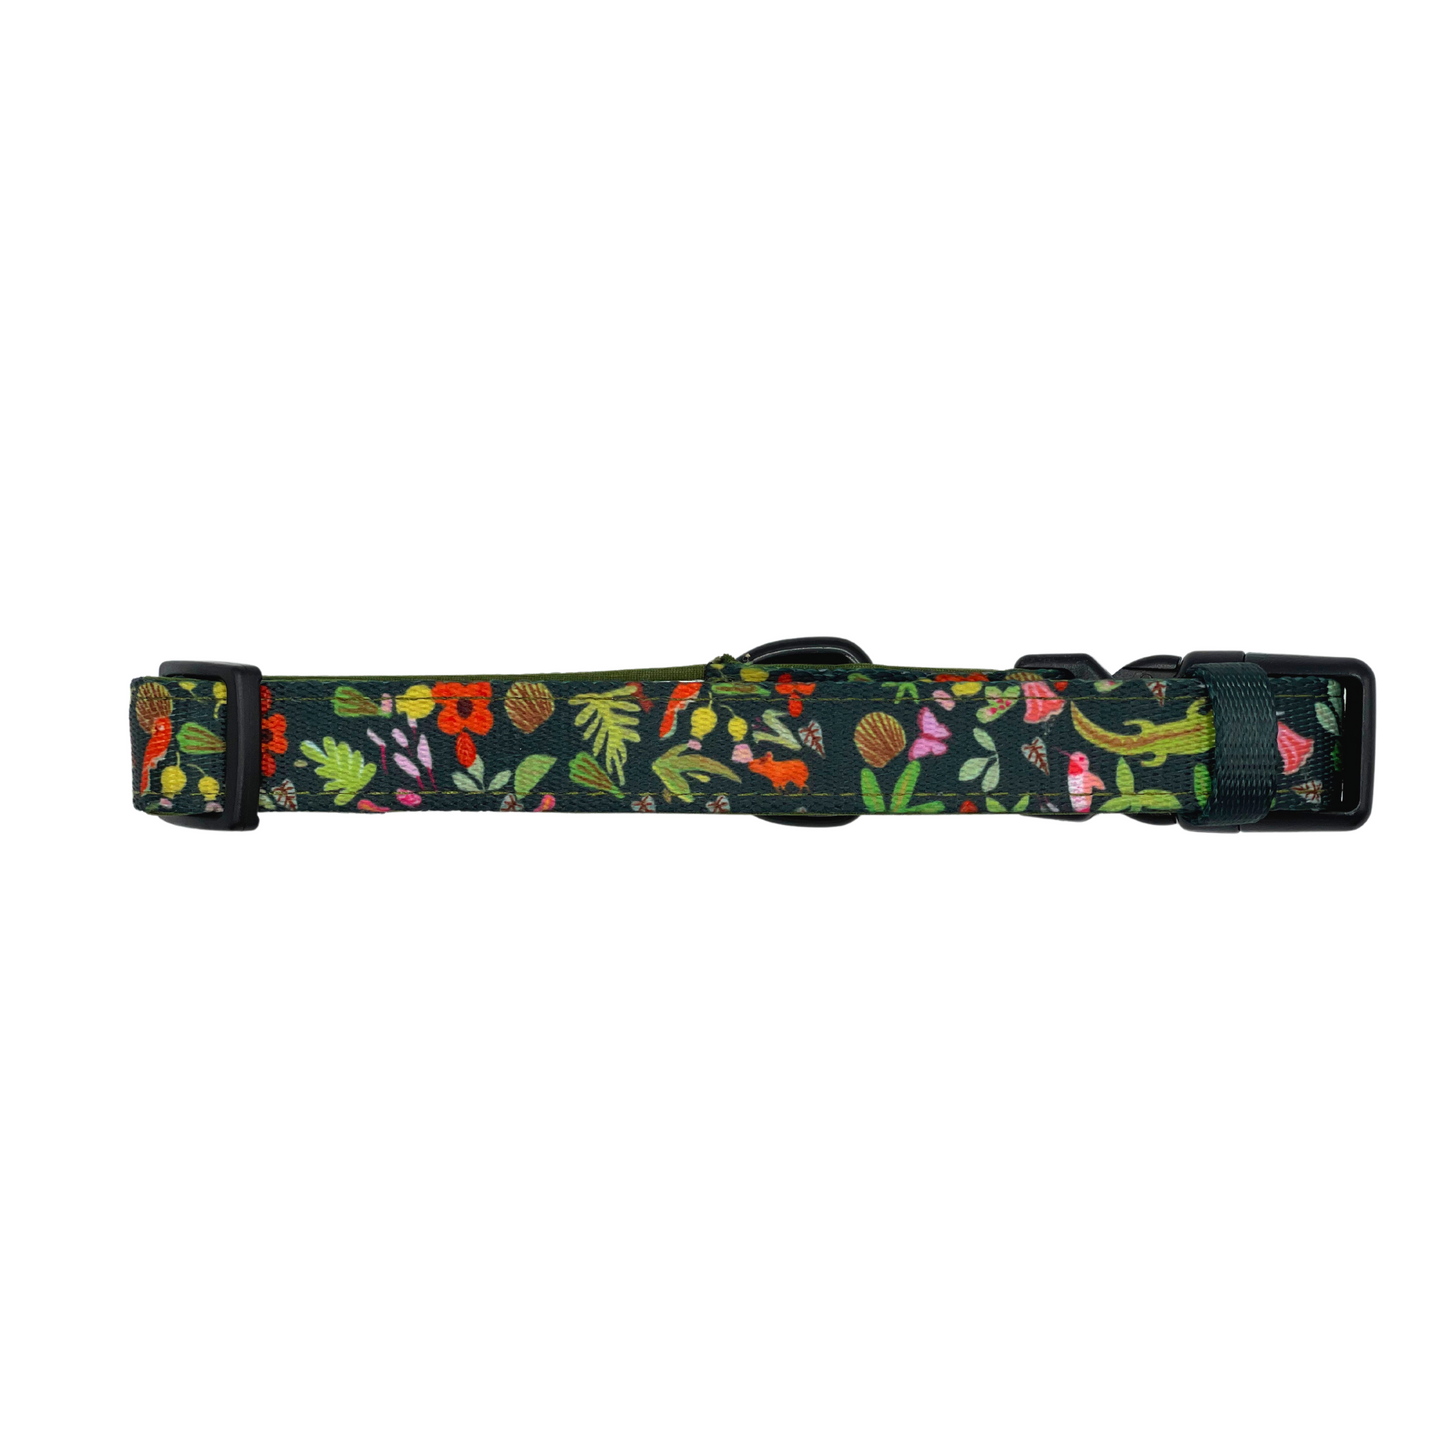 Pata Paw x Holalola collar for dogs and cats showing its backside